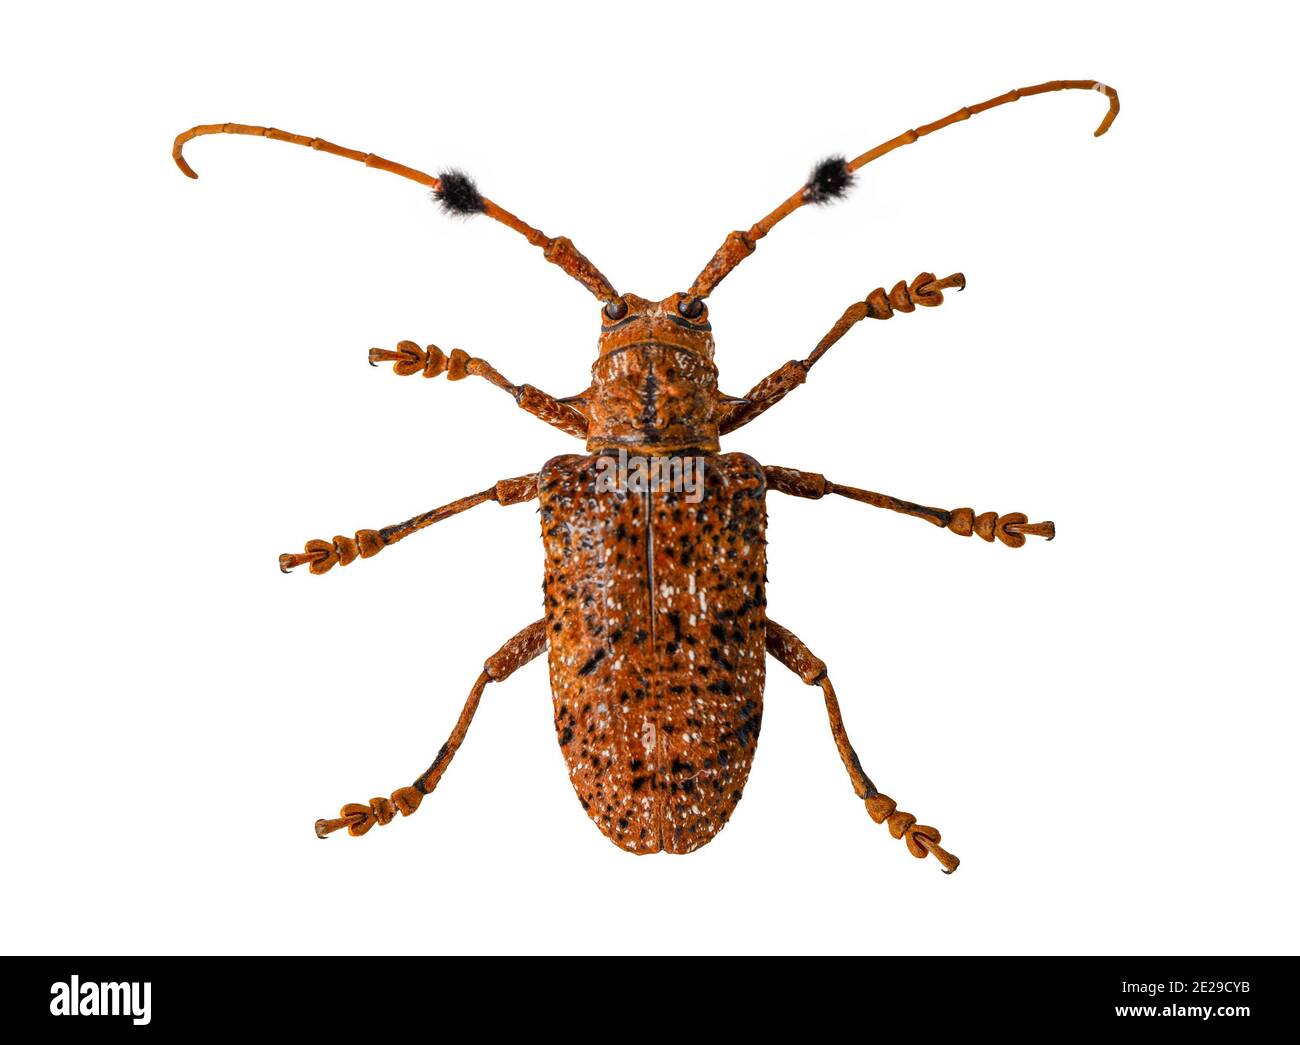 The beetle with the scientific name Aristobia horridula with clipping path. Stock Photo